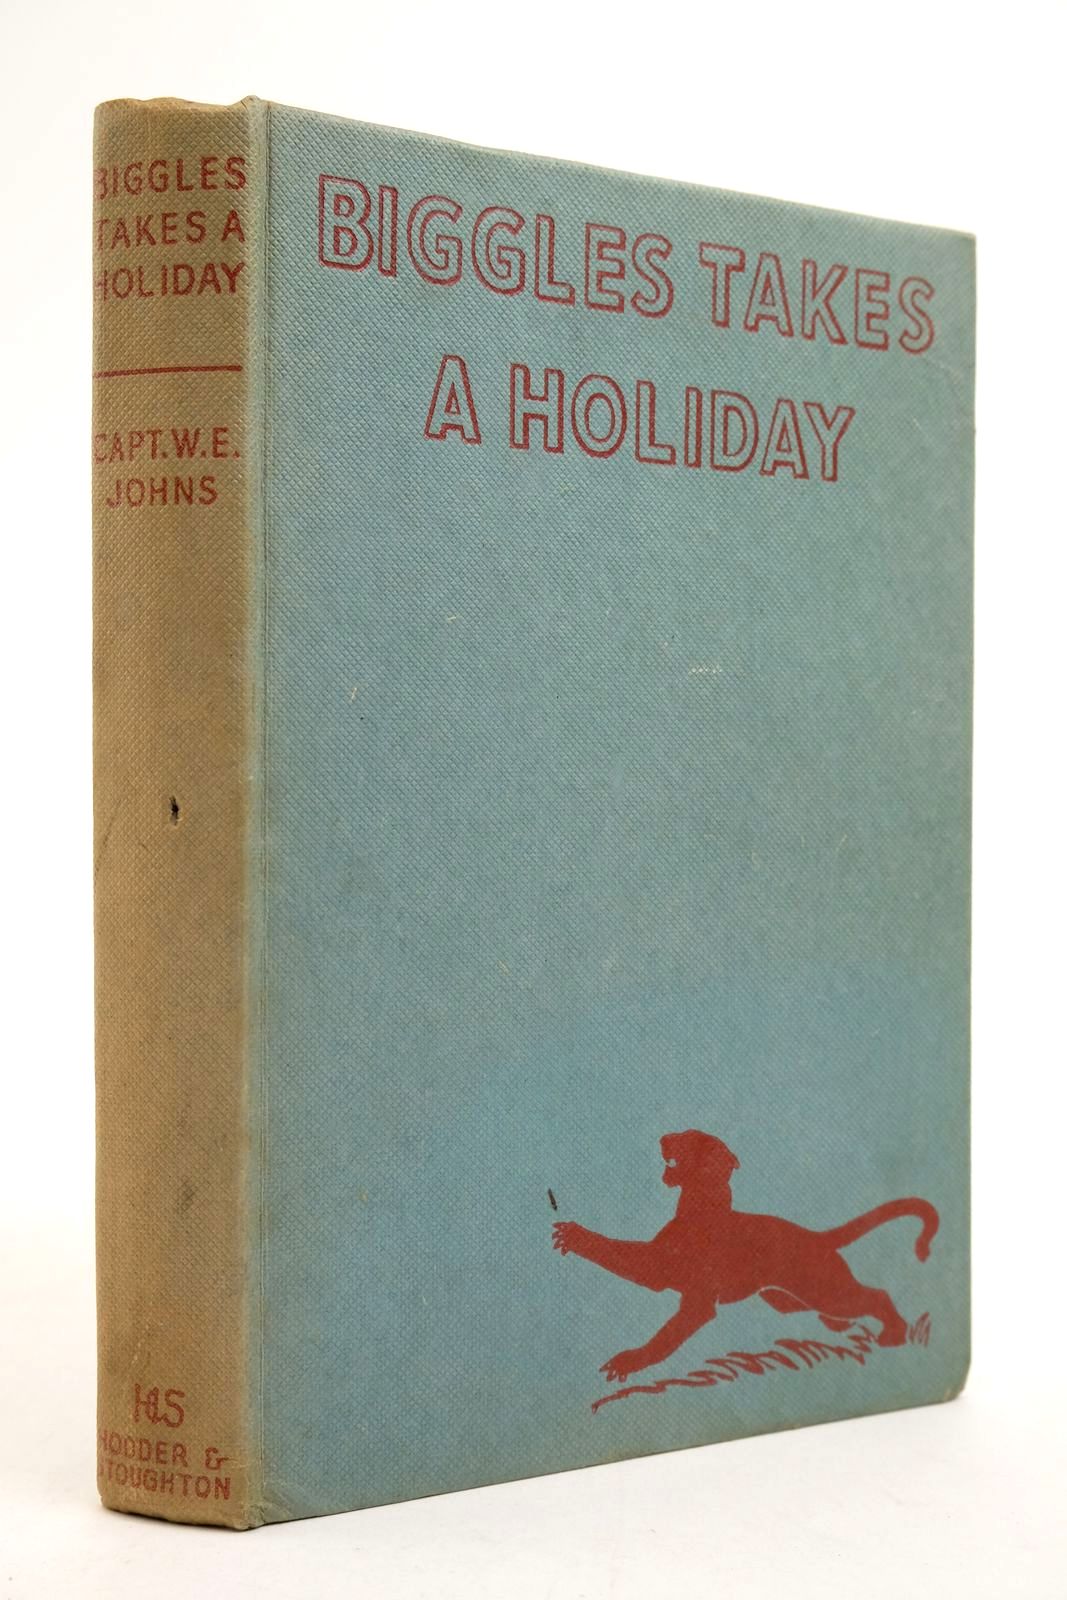 Photo of BIGGLES TAKES A HOLIDAY written by Johns, W.E. illustrated by Stead,  published by Hodder & Stoughton (STOCK CODE: 2139680)  for sale by Stella & Rose's Books